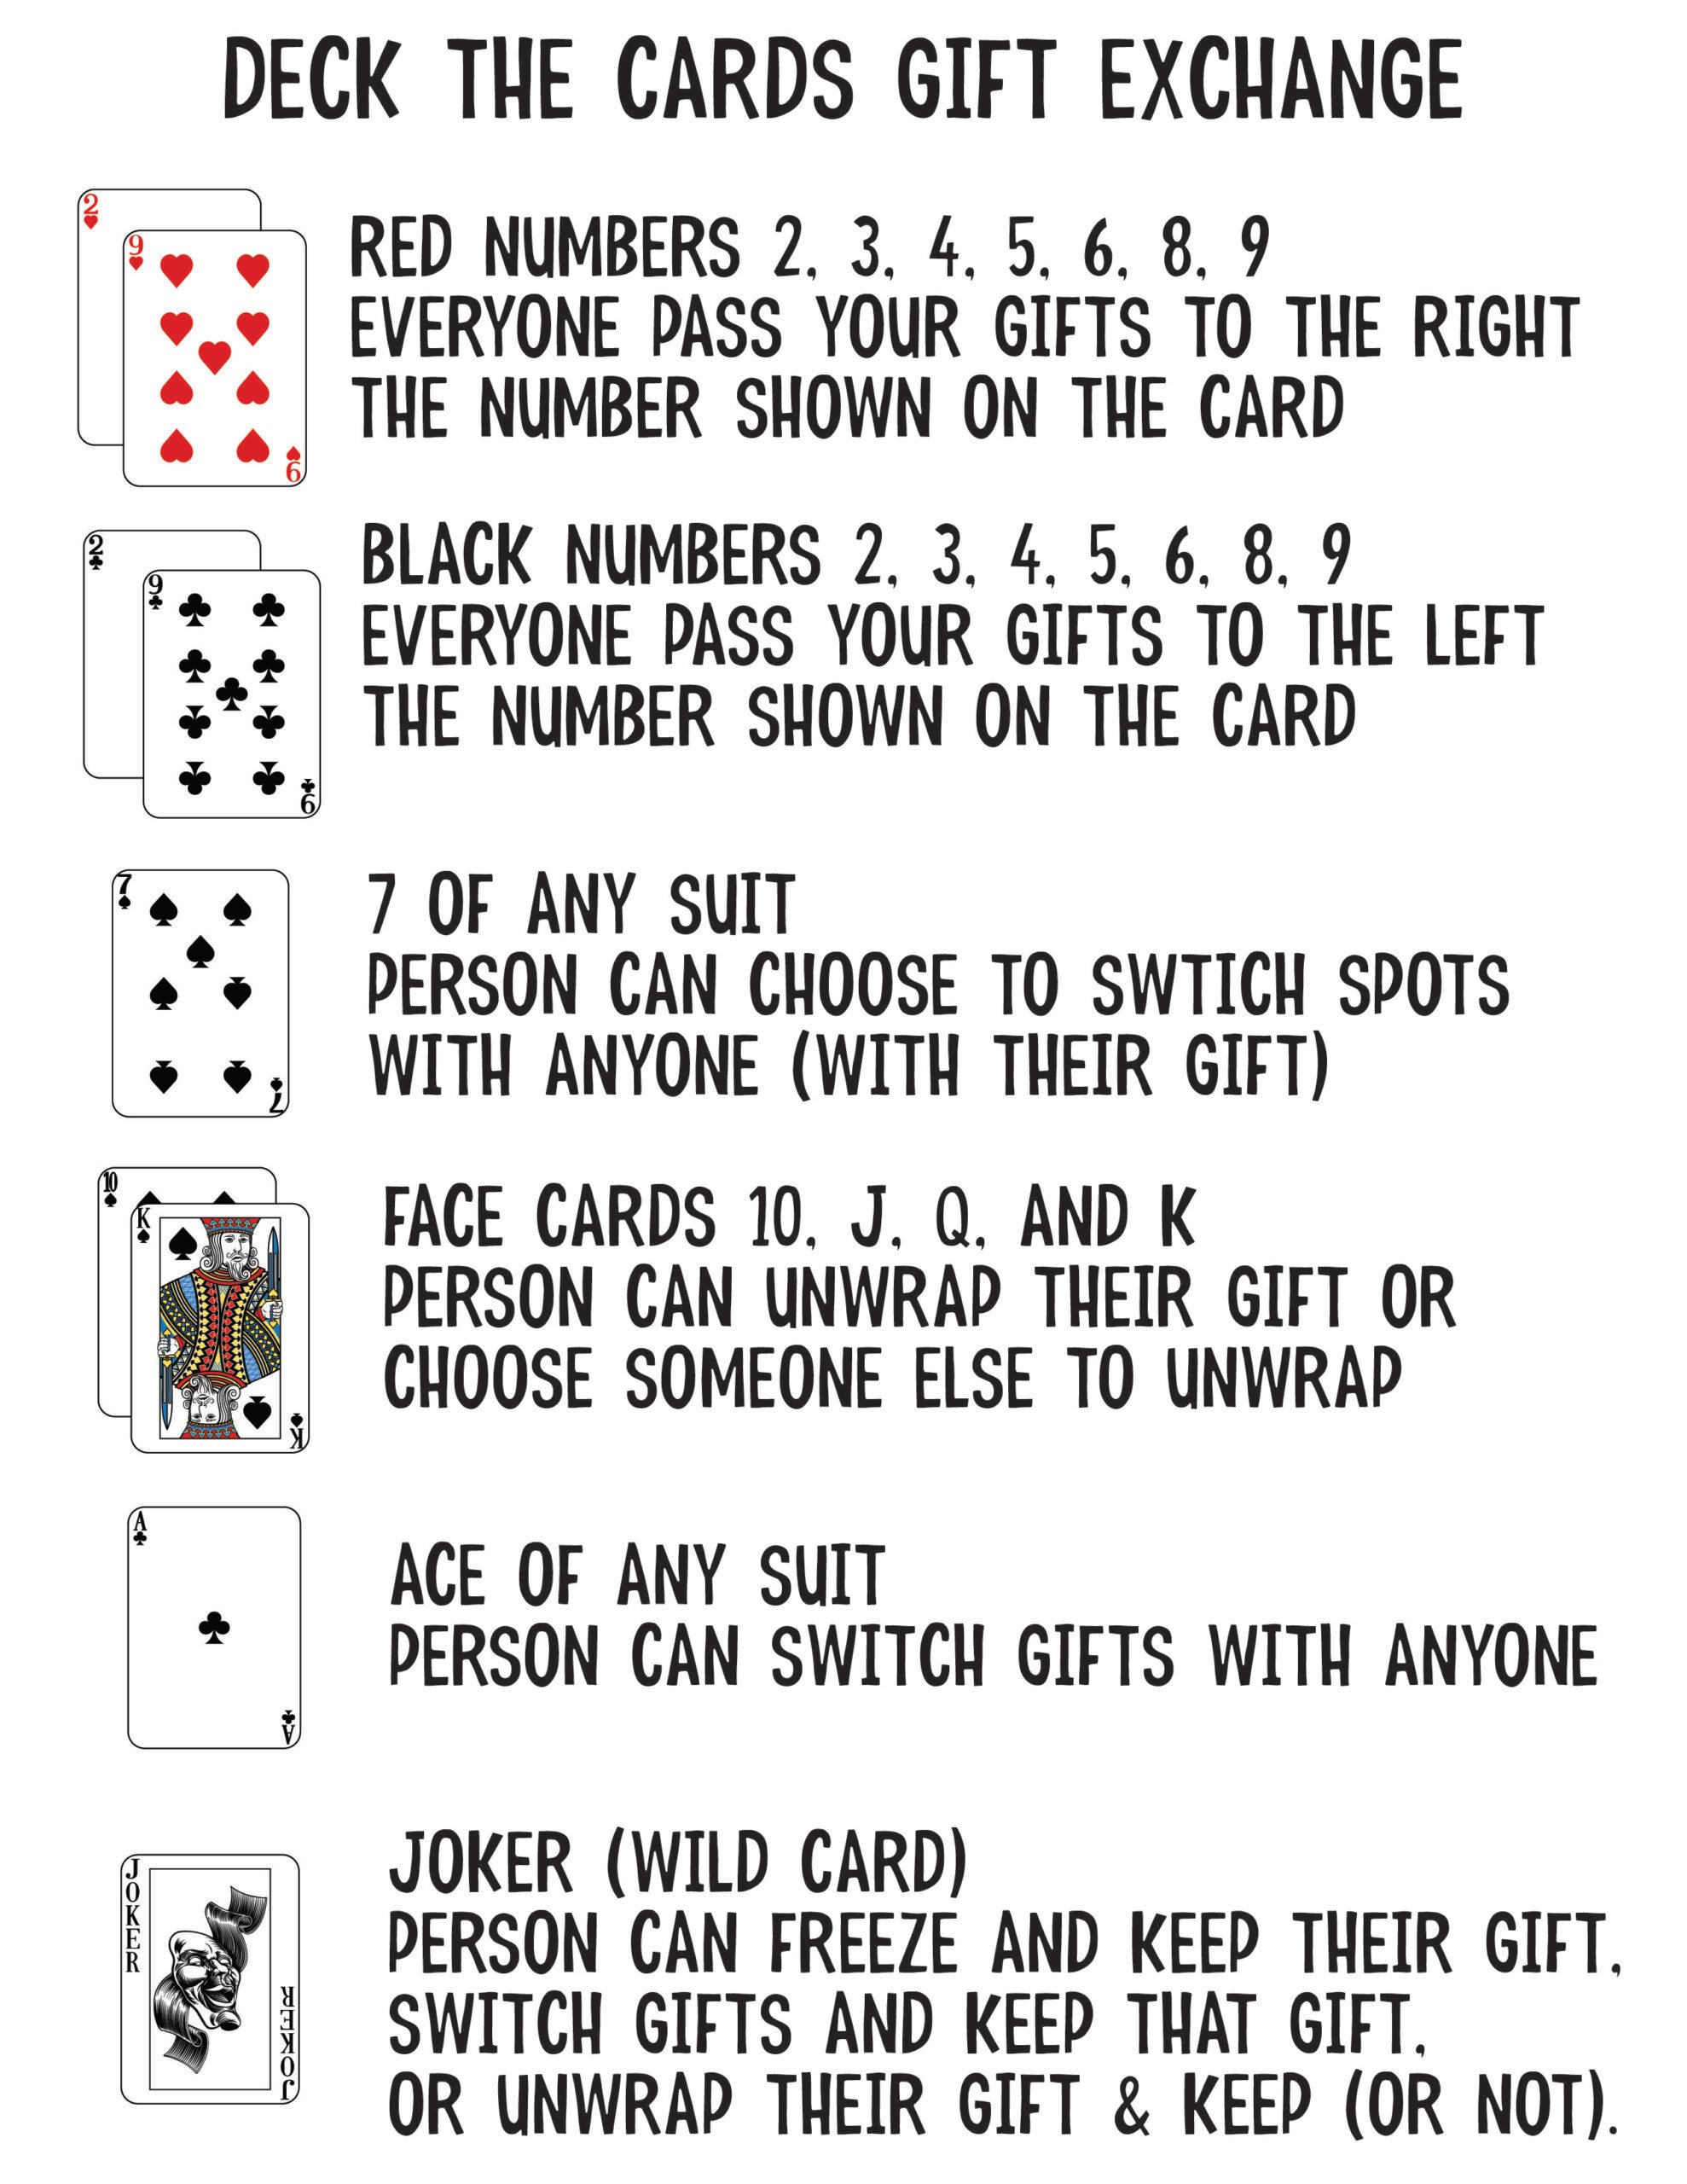 gift exchange rules featuring different playing cards